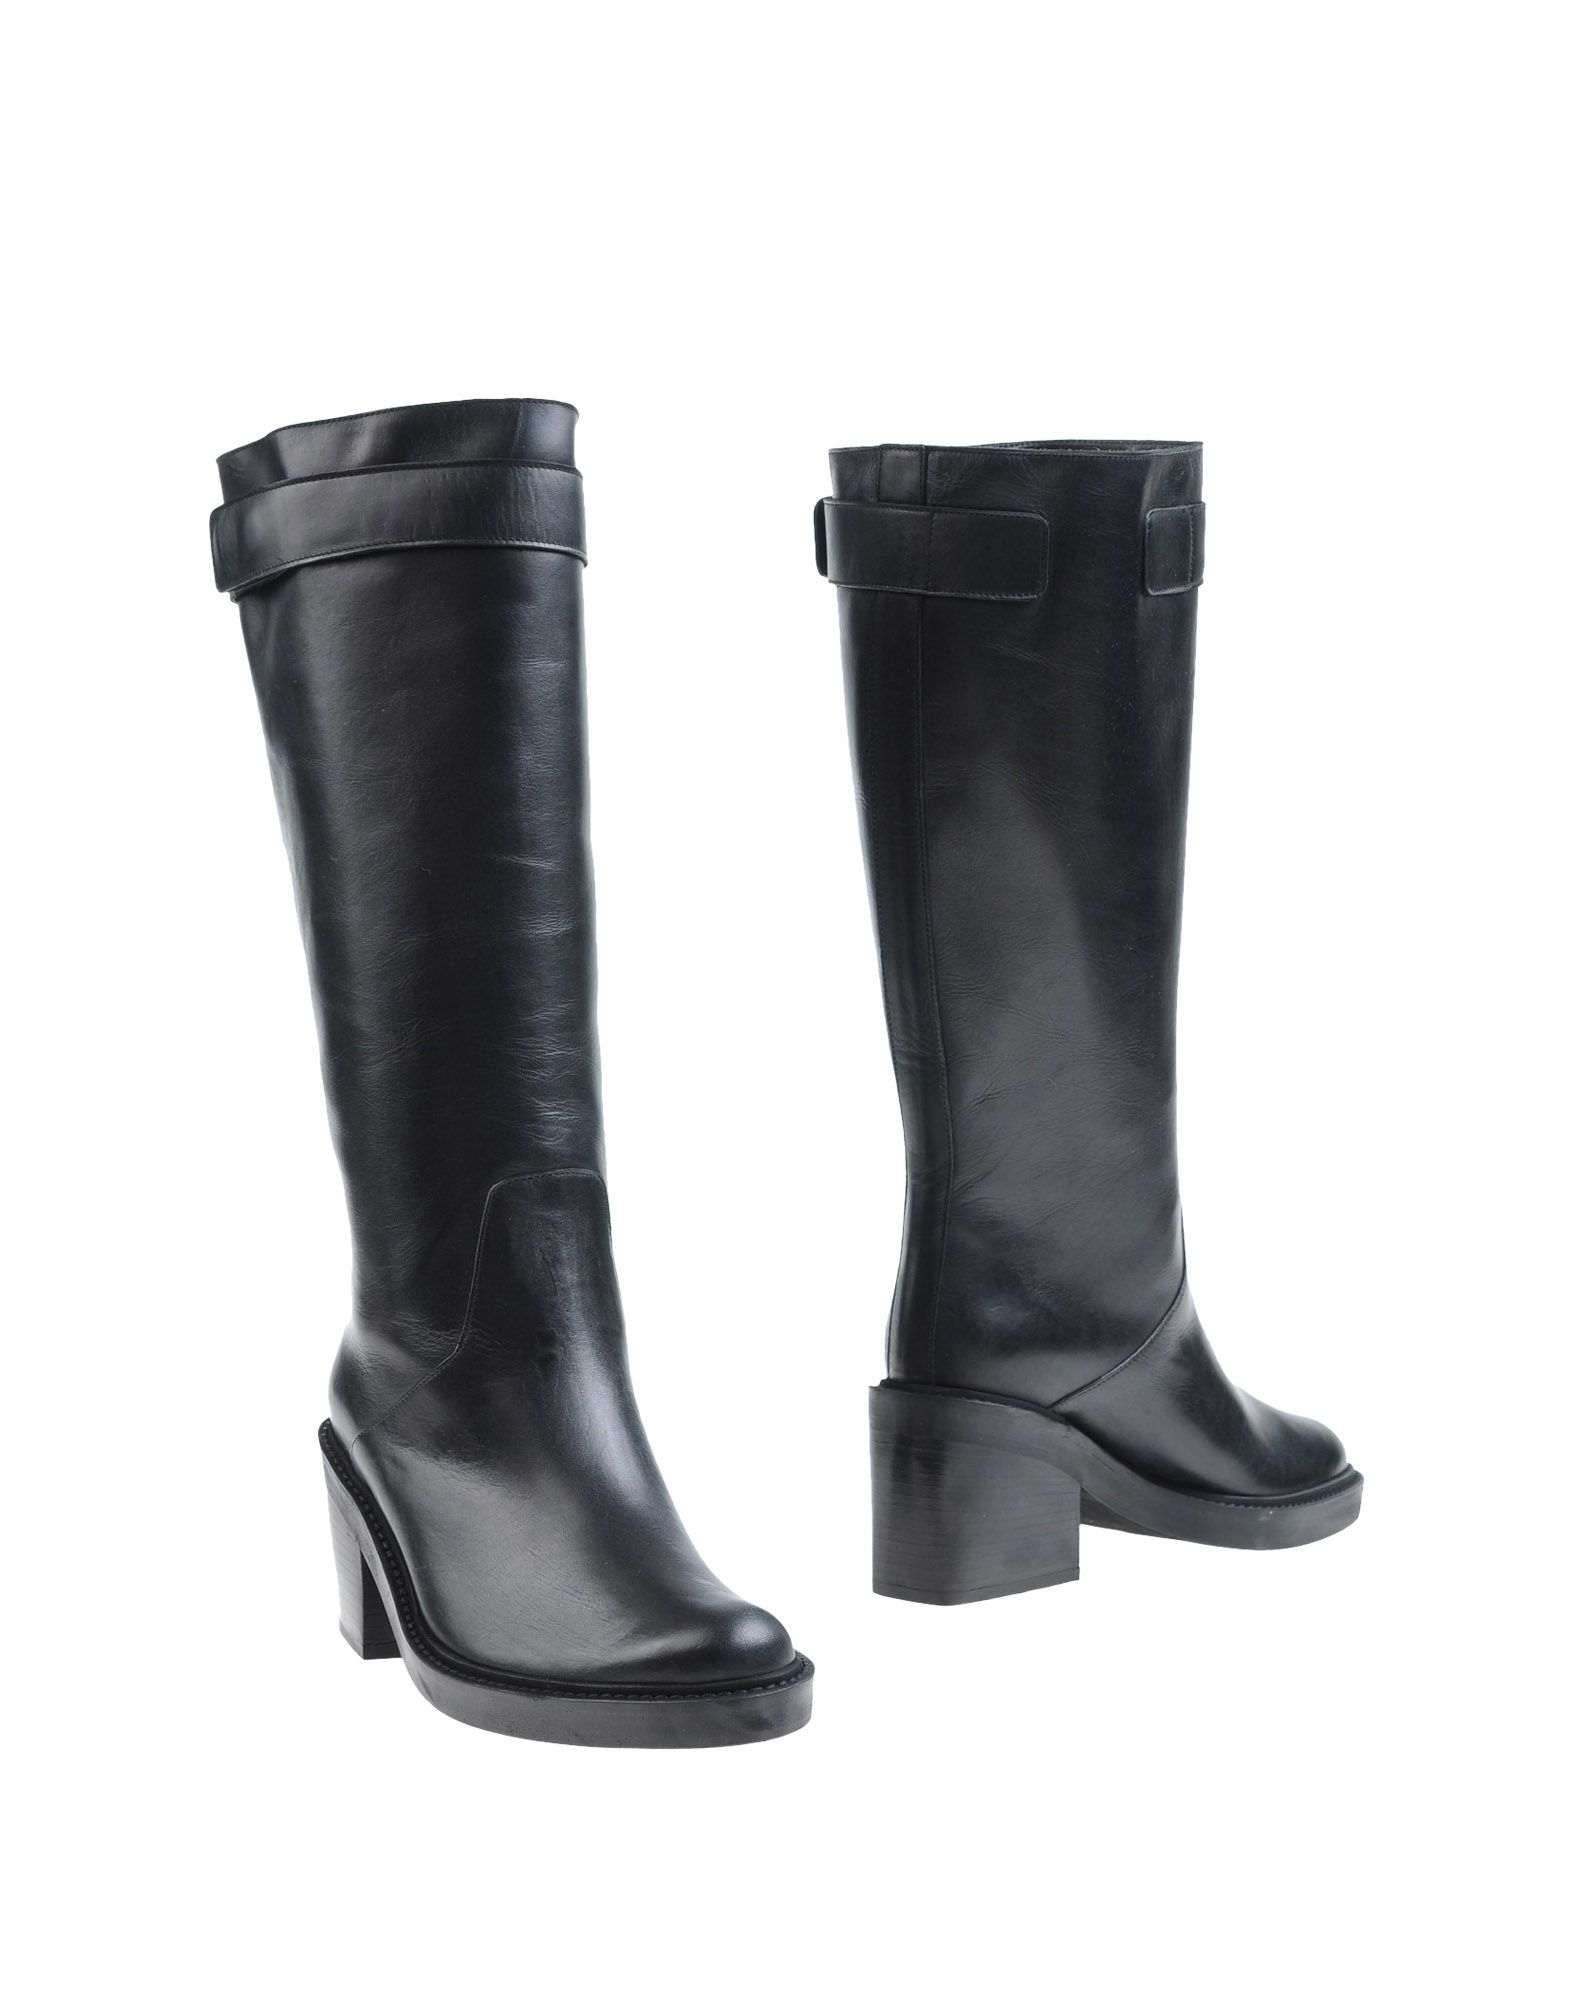 Lyst - Helmut Lang Boots in Black